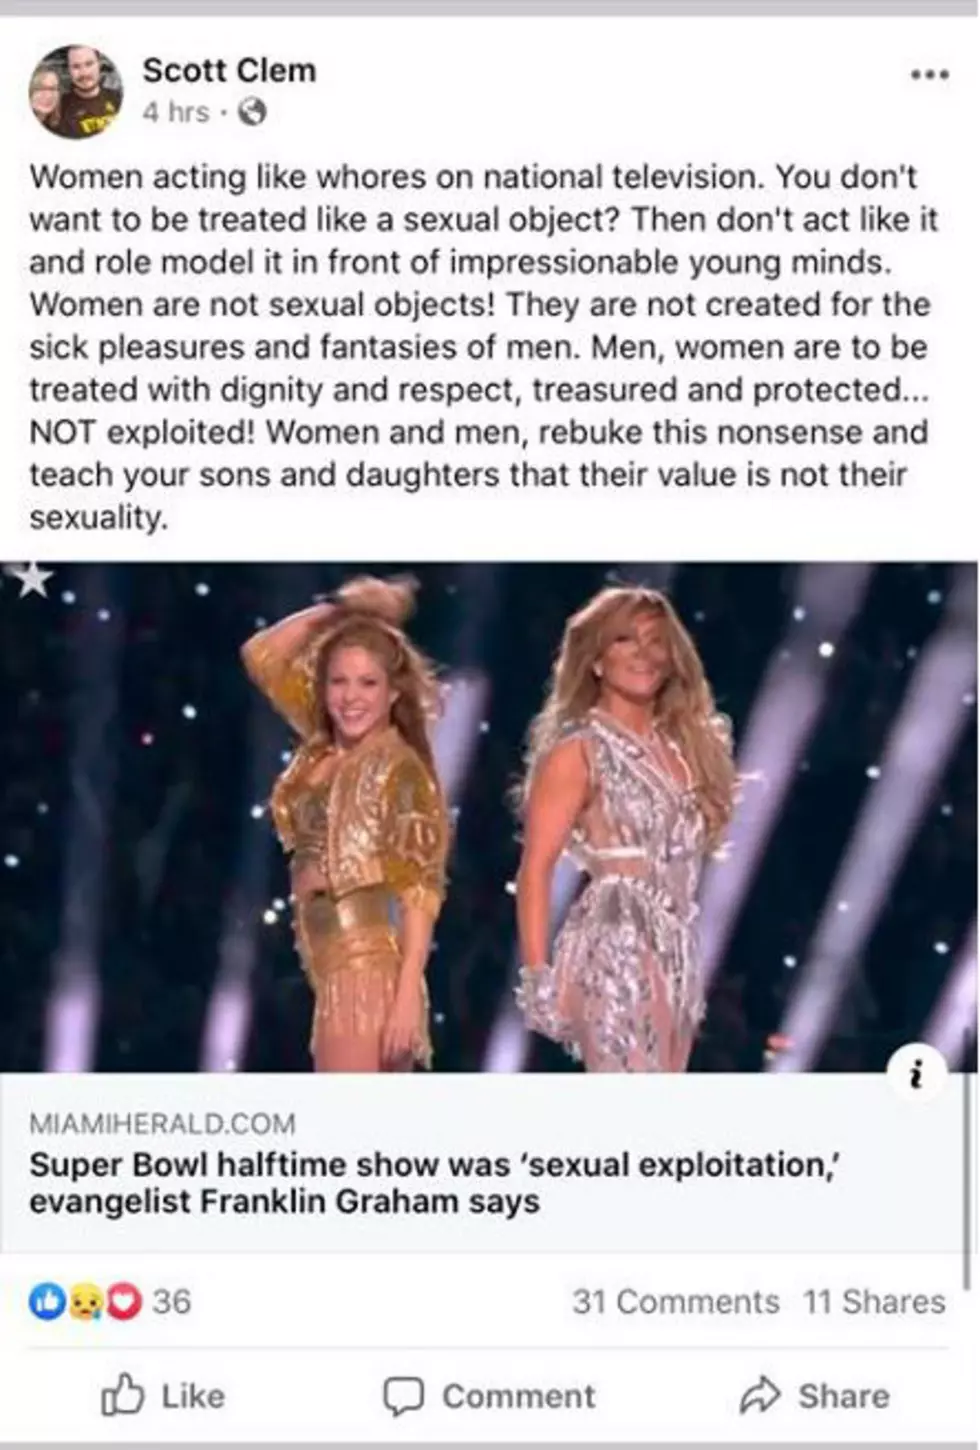 Wyo. Lawmaker: Super Bowl Halftime Performers Acted 'Like Whores'